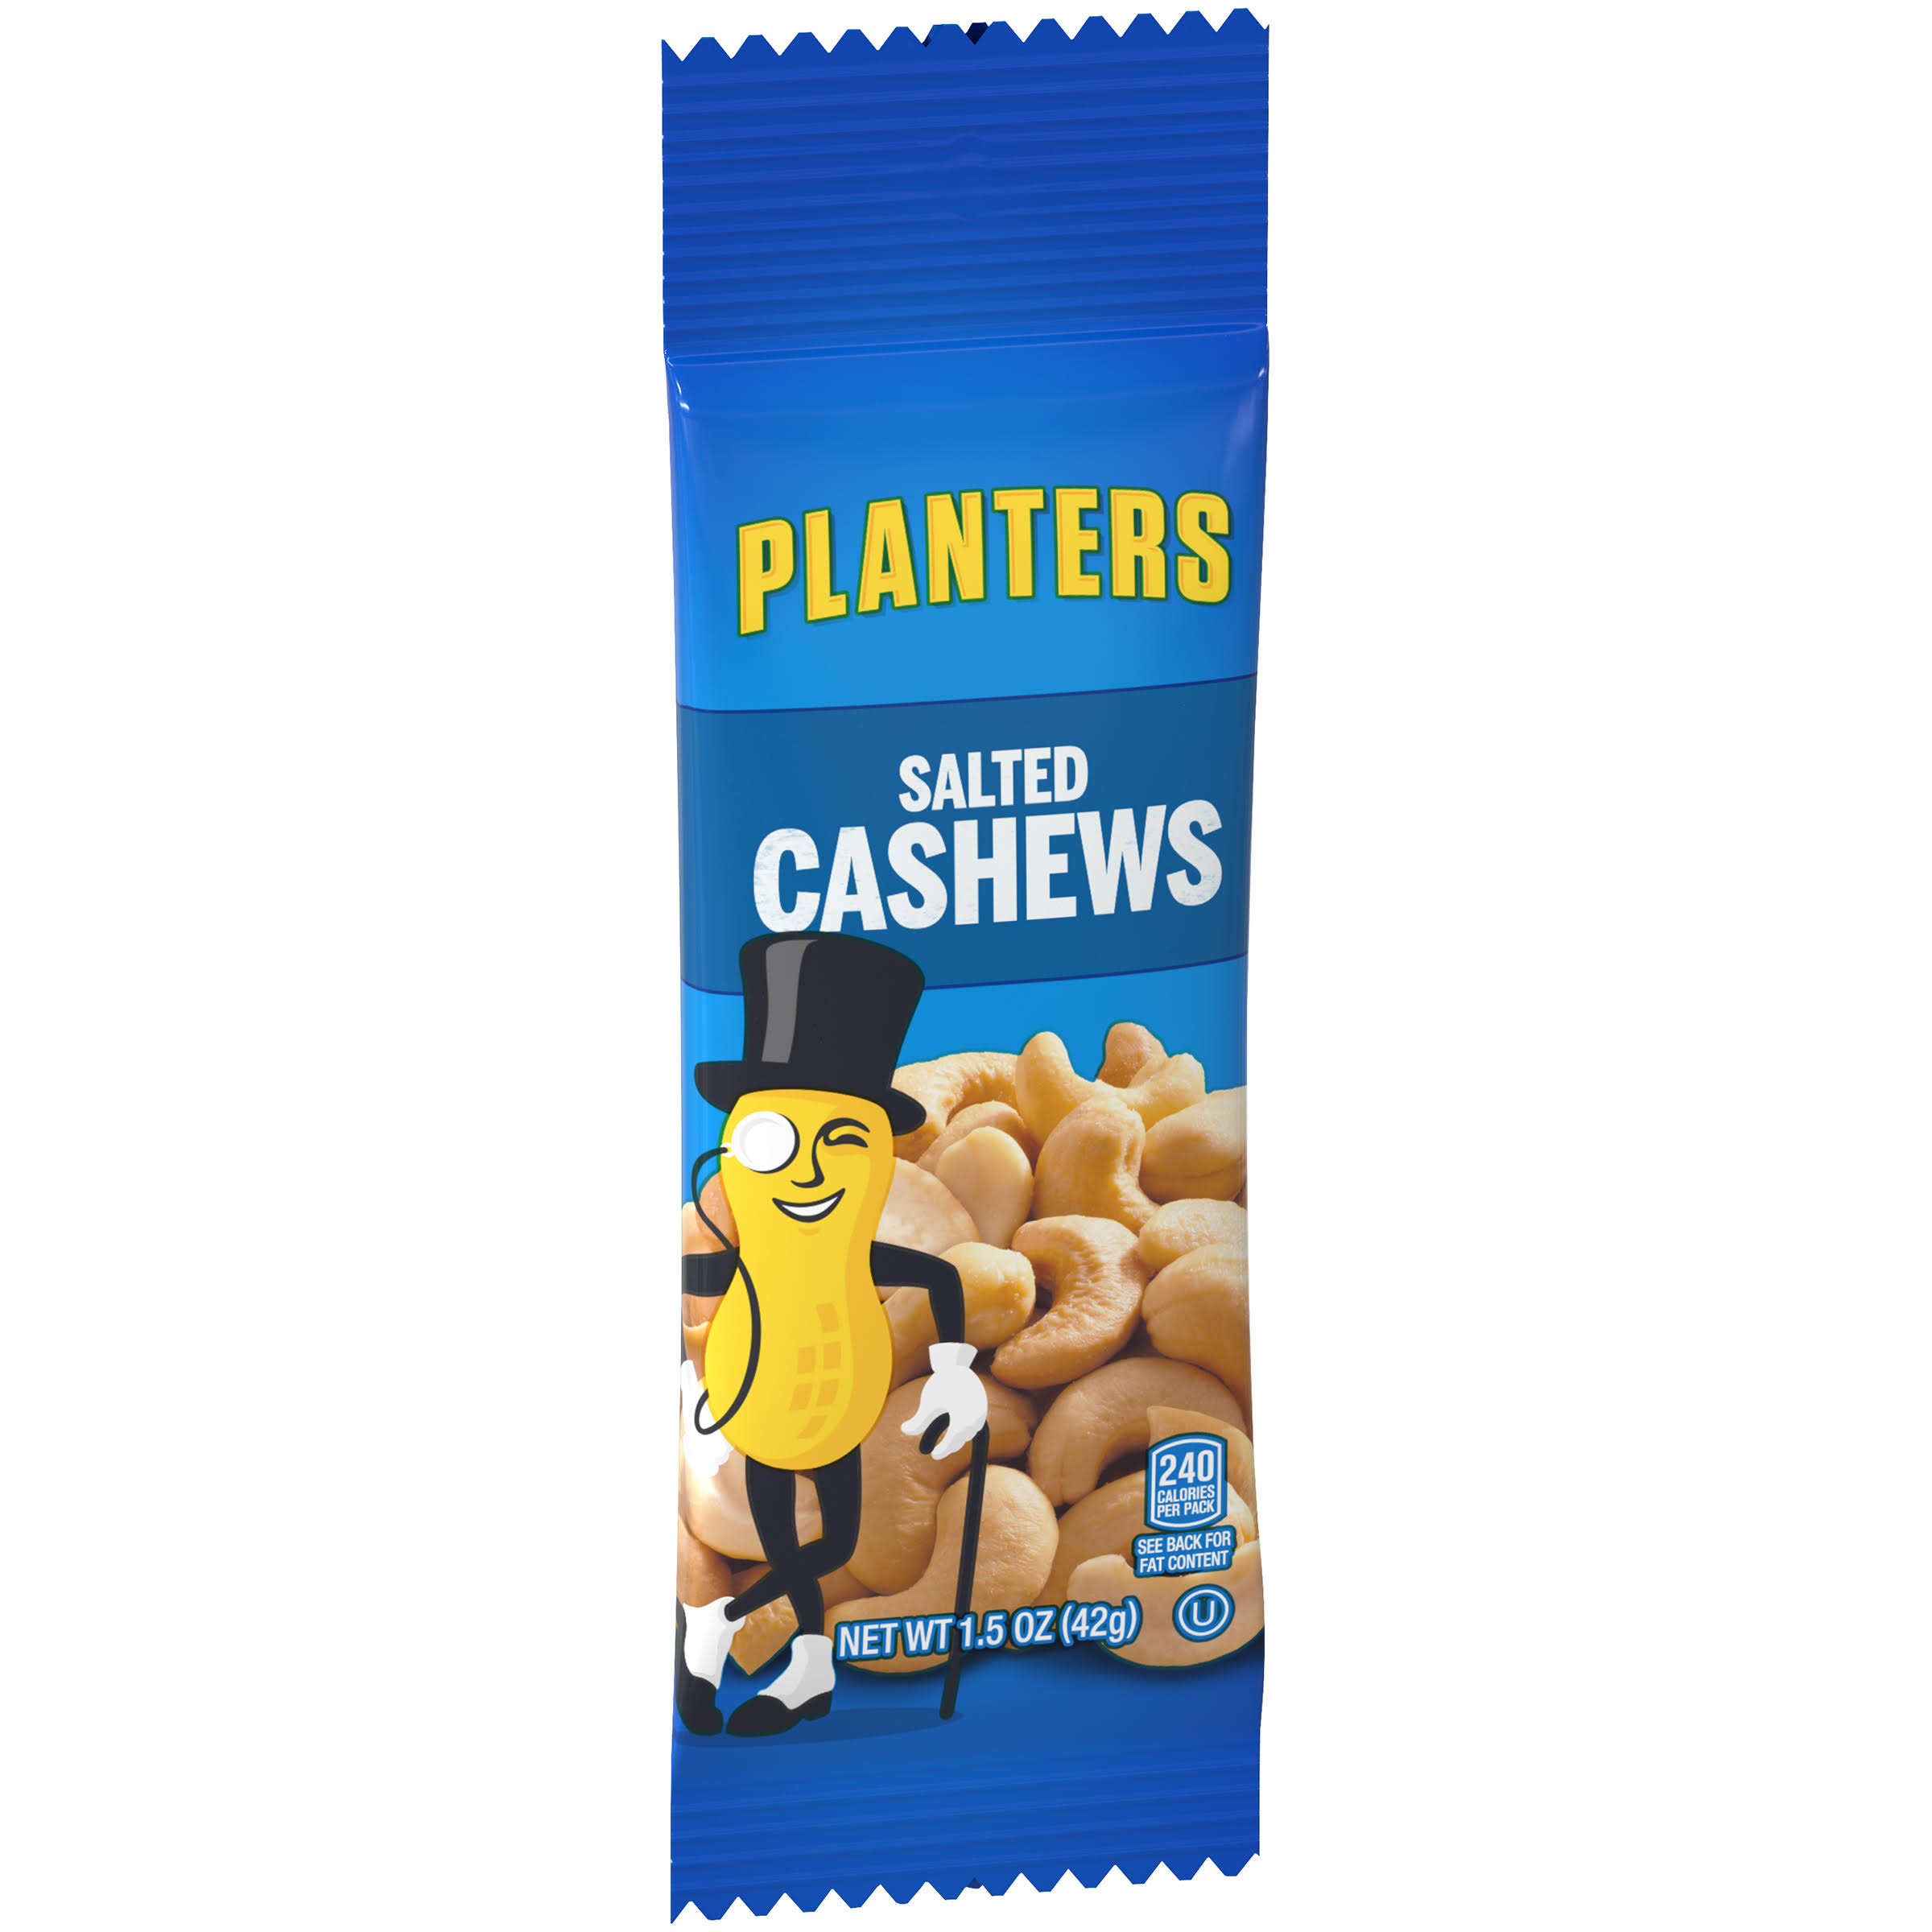 Planters Salted Cashew Tube.99 Each, 1.5 Ounce 18 Count -- 6 Case